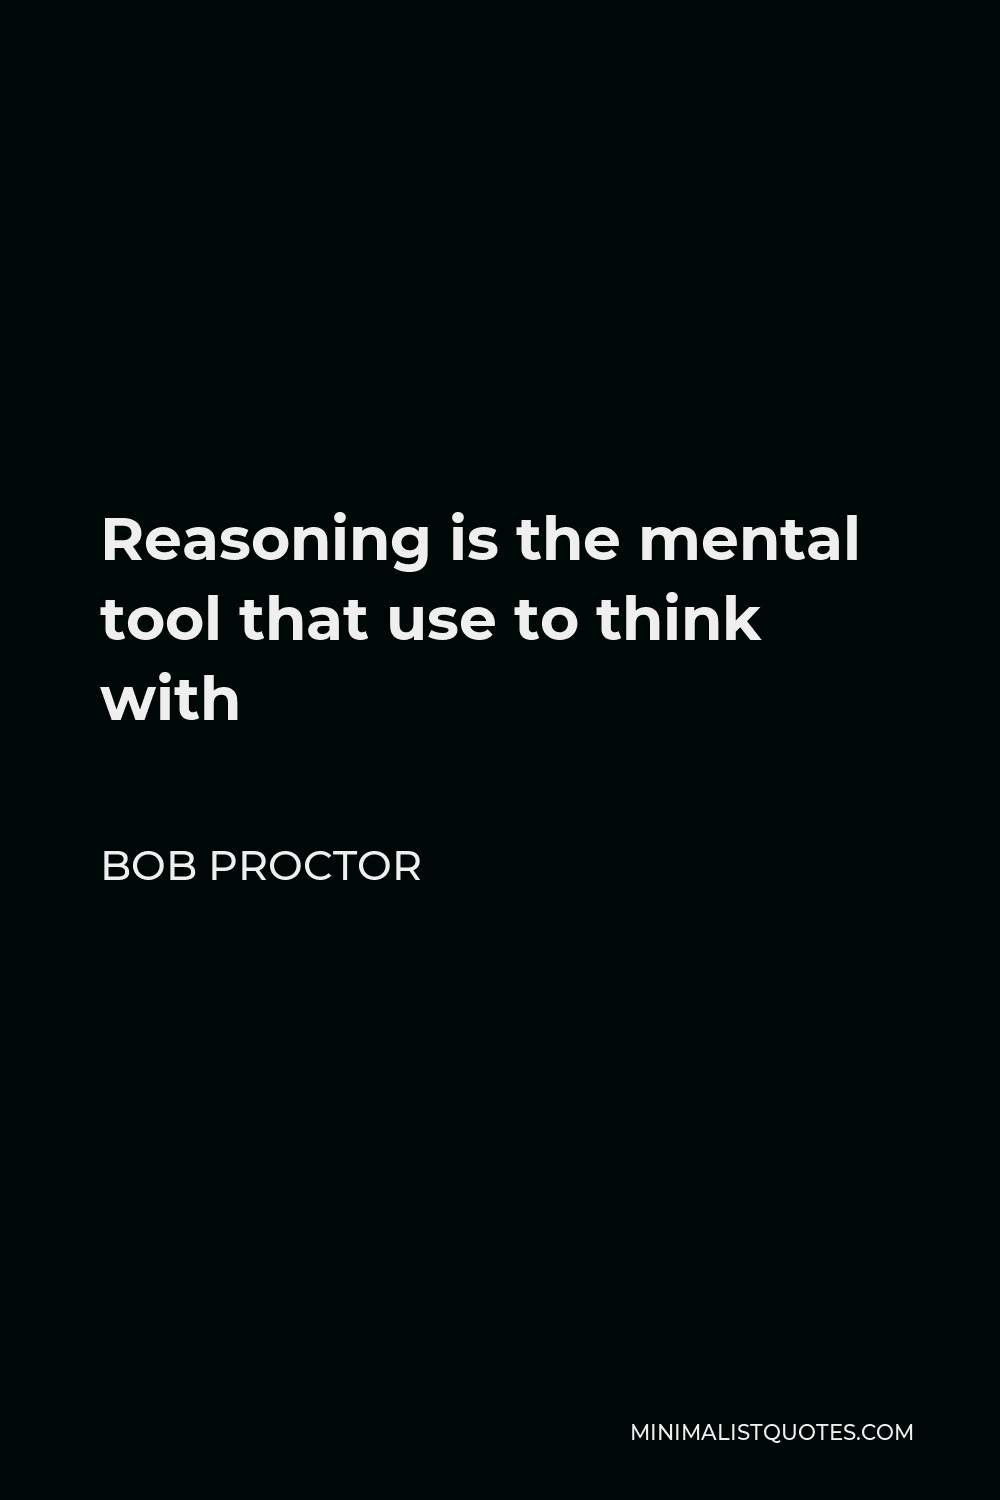 Bob Proctor Quote - Reasoning is the mental tool that use to think with